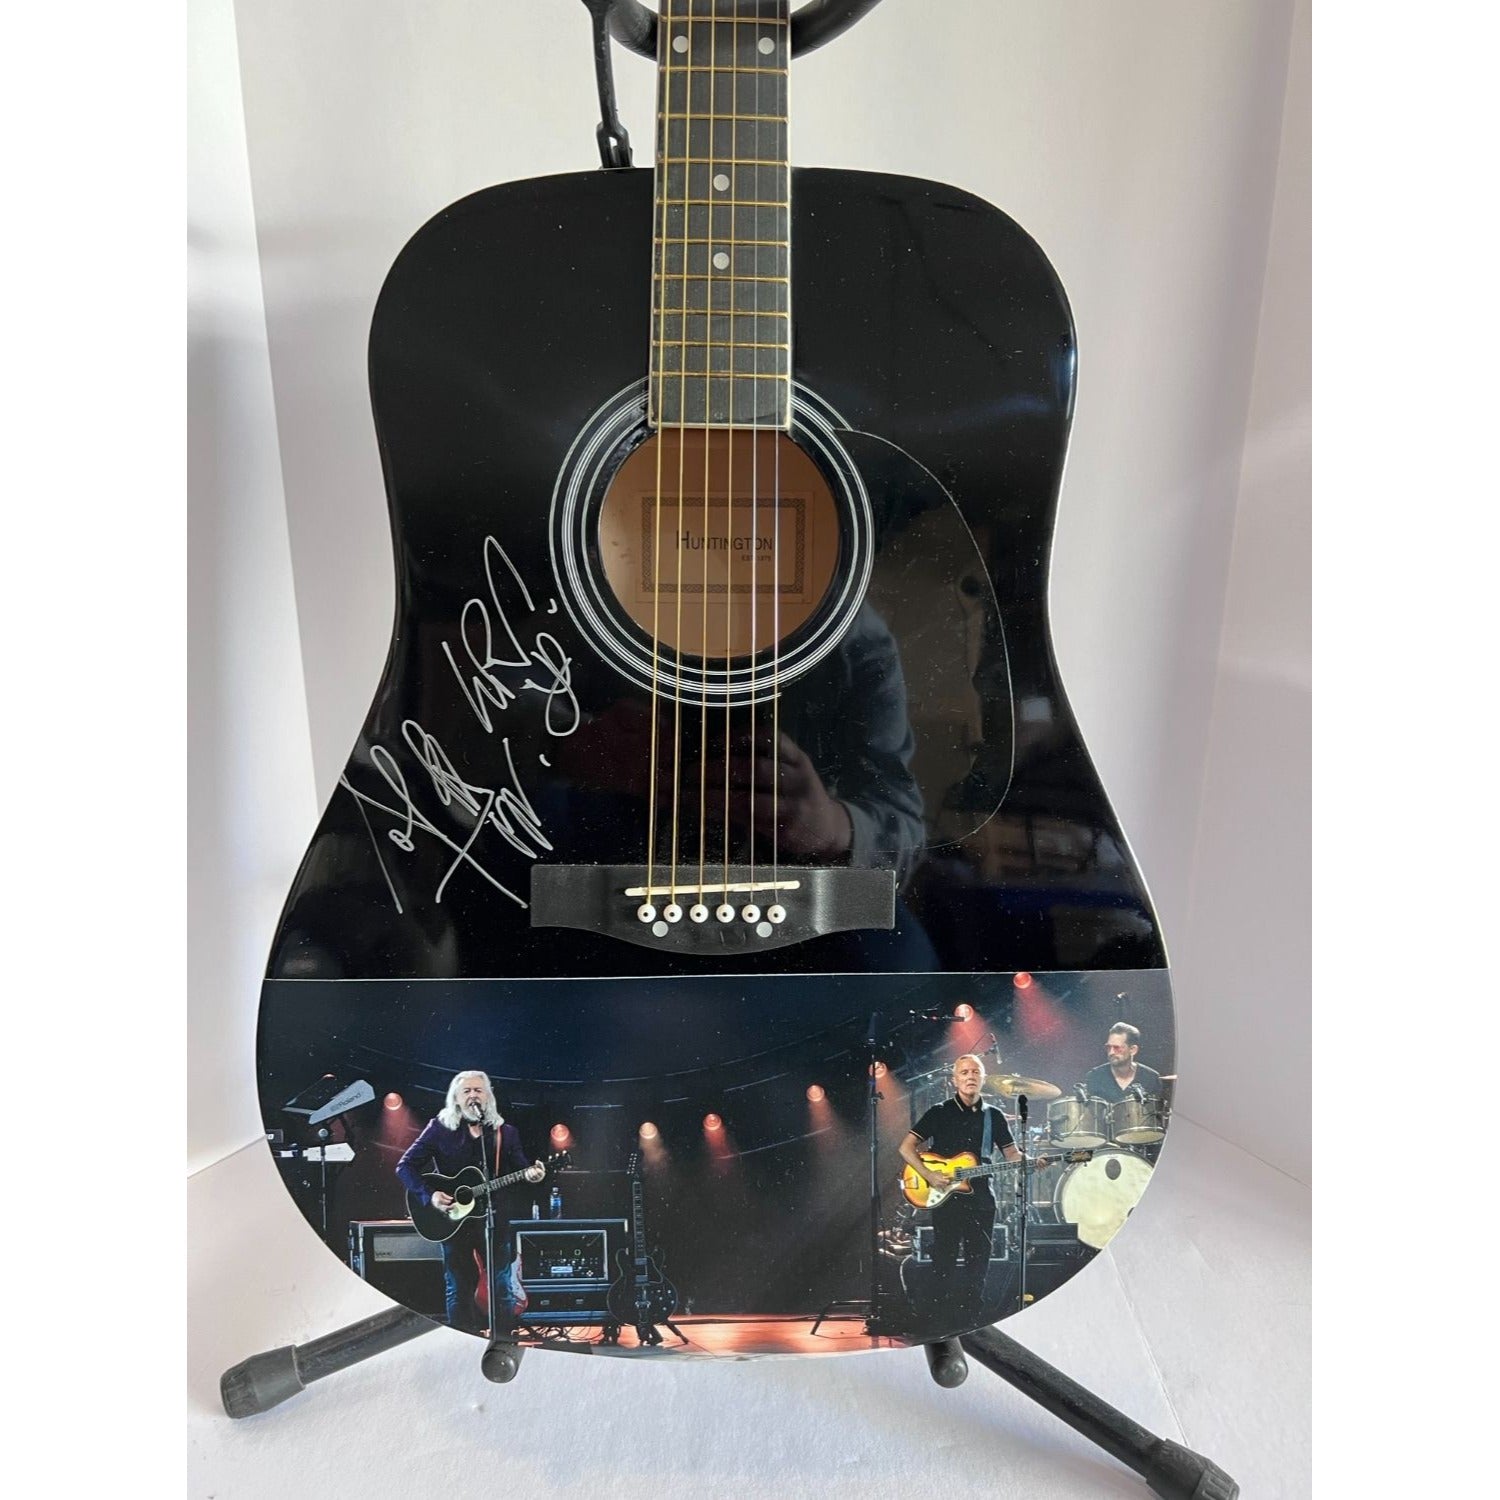 Tears for fears full-size black acoustic one of a kind guitar signed with proof